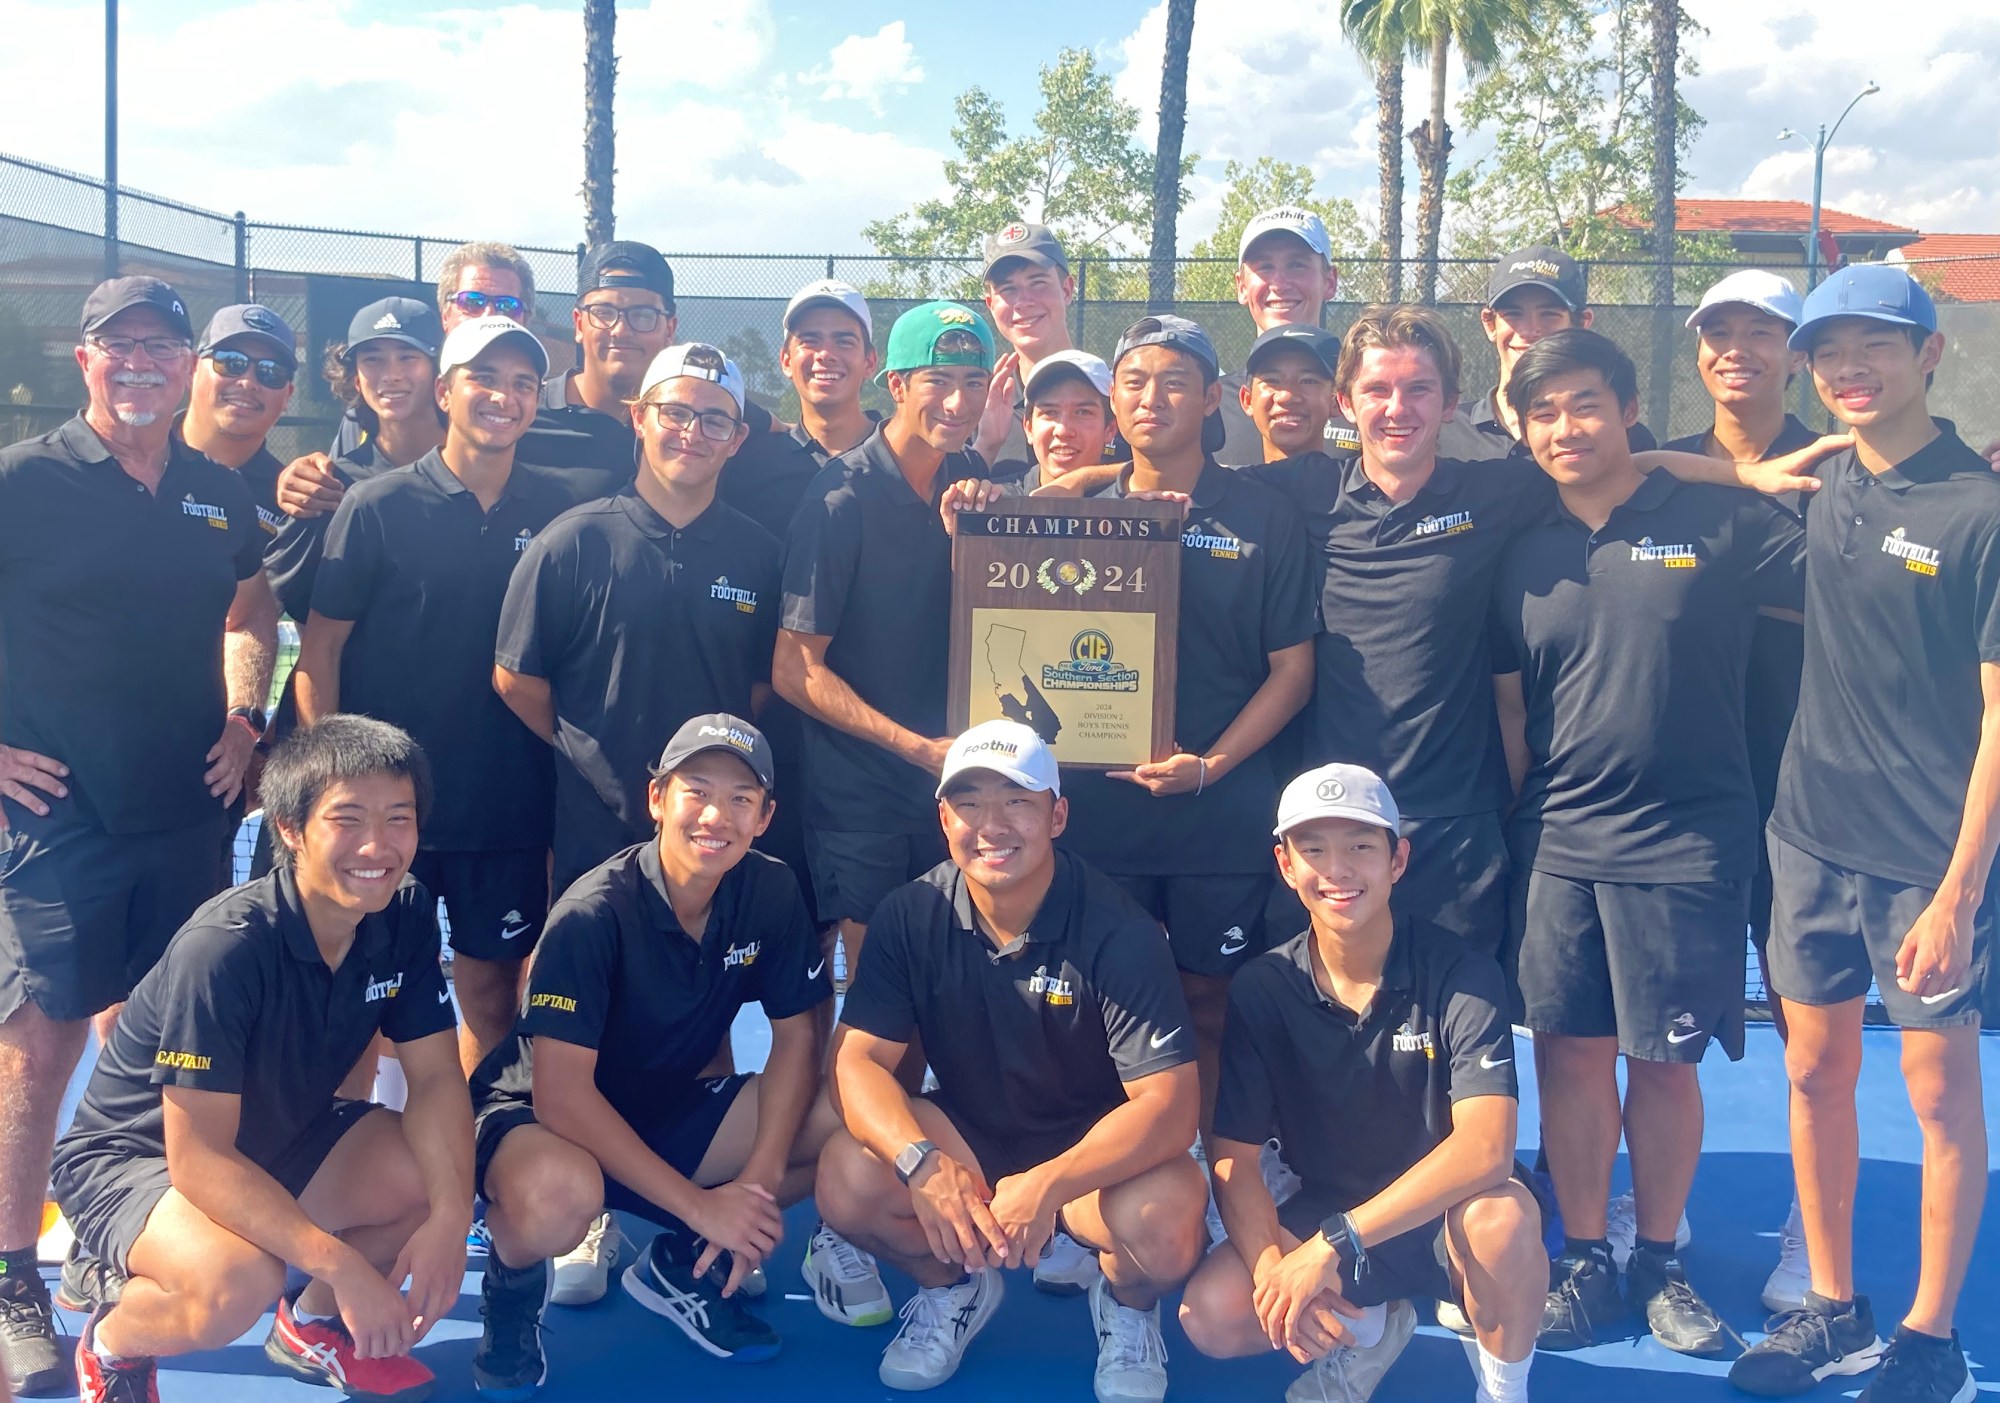 Foothill's boys tennis team won its first CIF-SS championship by defeating Flintridge Prep 10-8 on Friday in the Division 2 final at the University of Redlands. (Photo by Dan Albano, Orange County Register/SCNG)